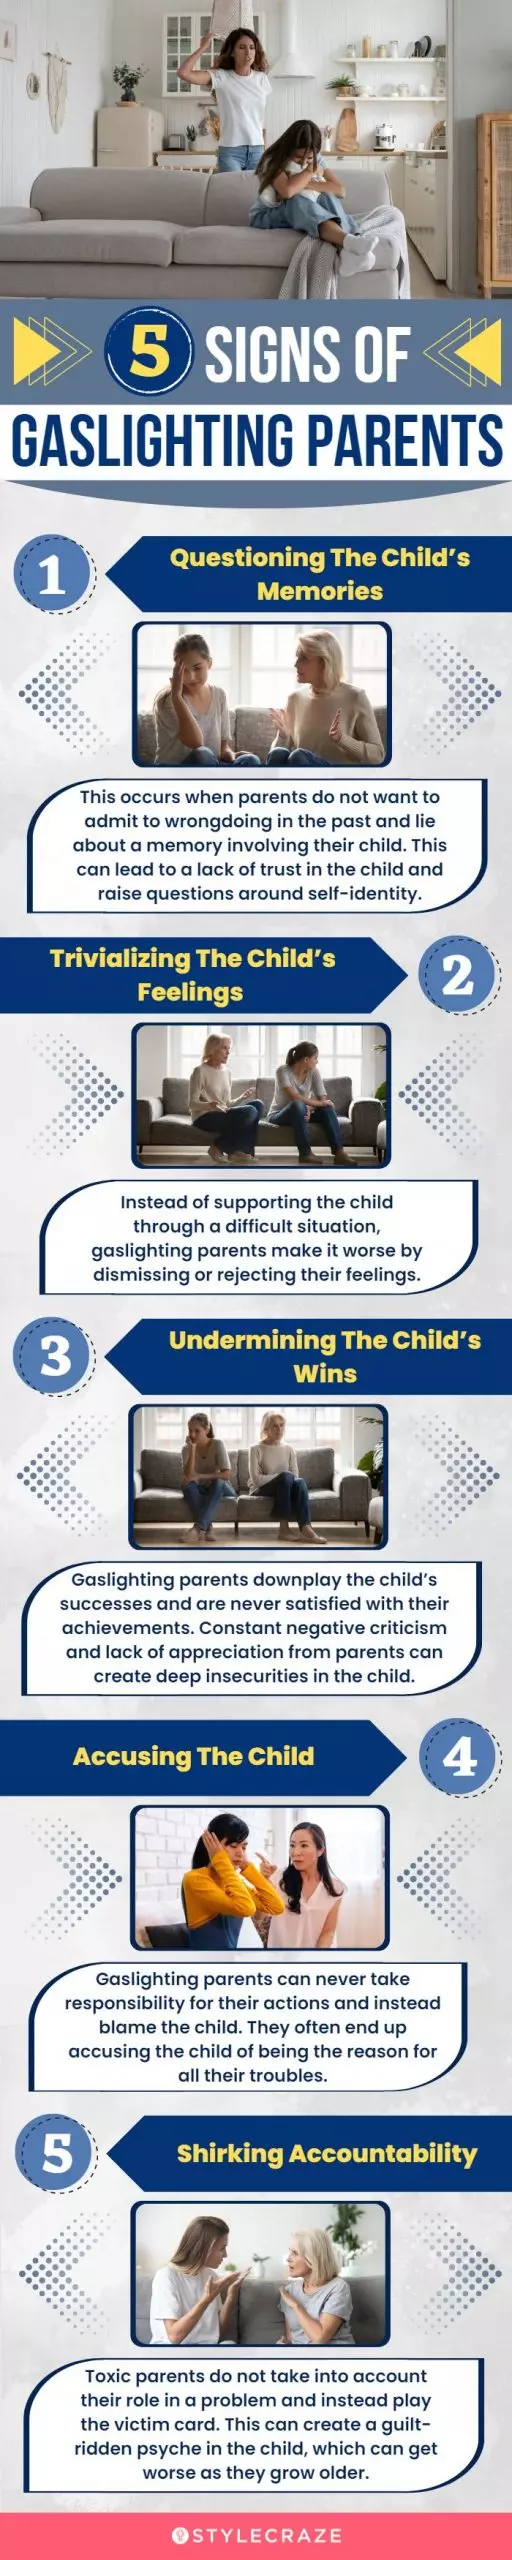 5 signs of gaslighting parents (infographic)